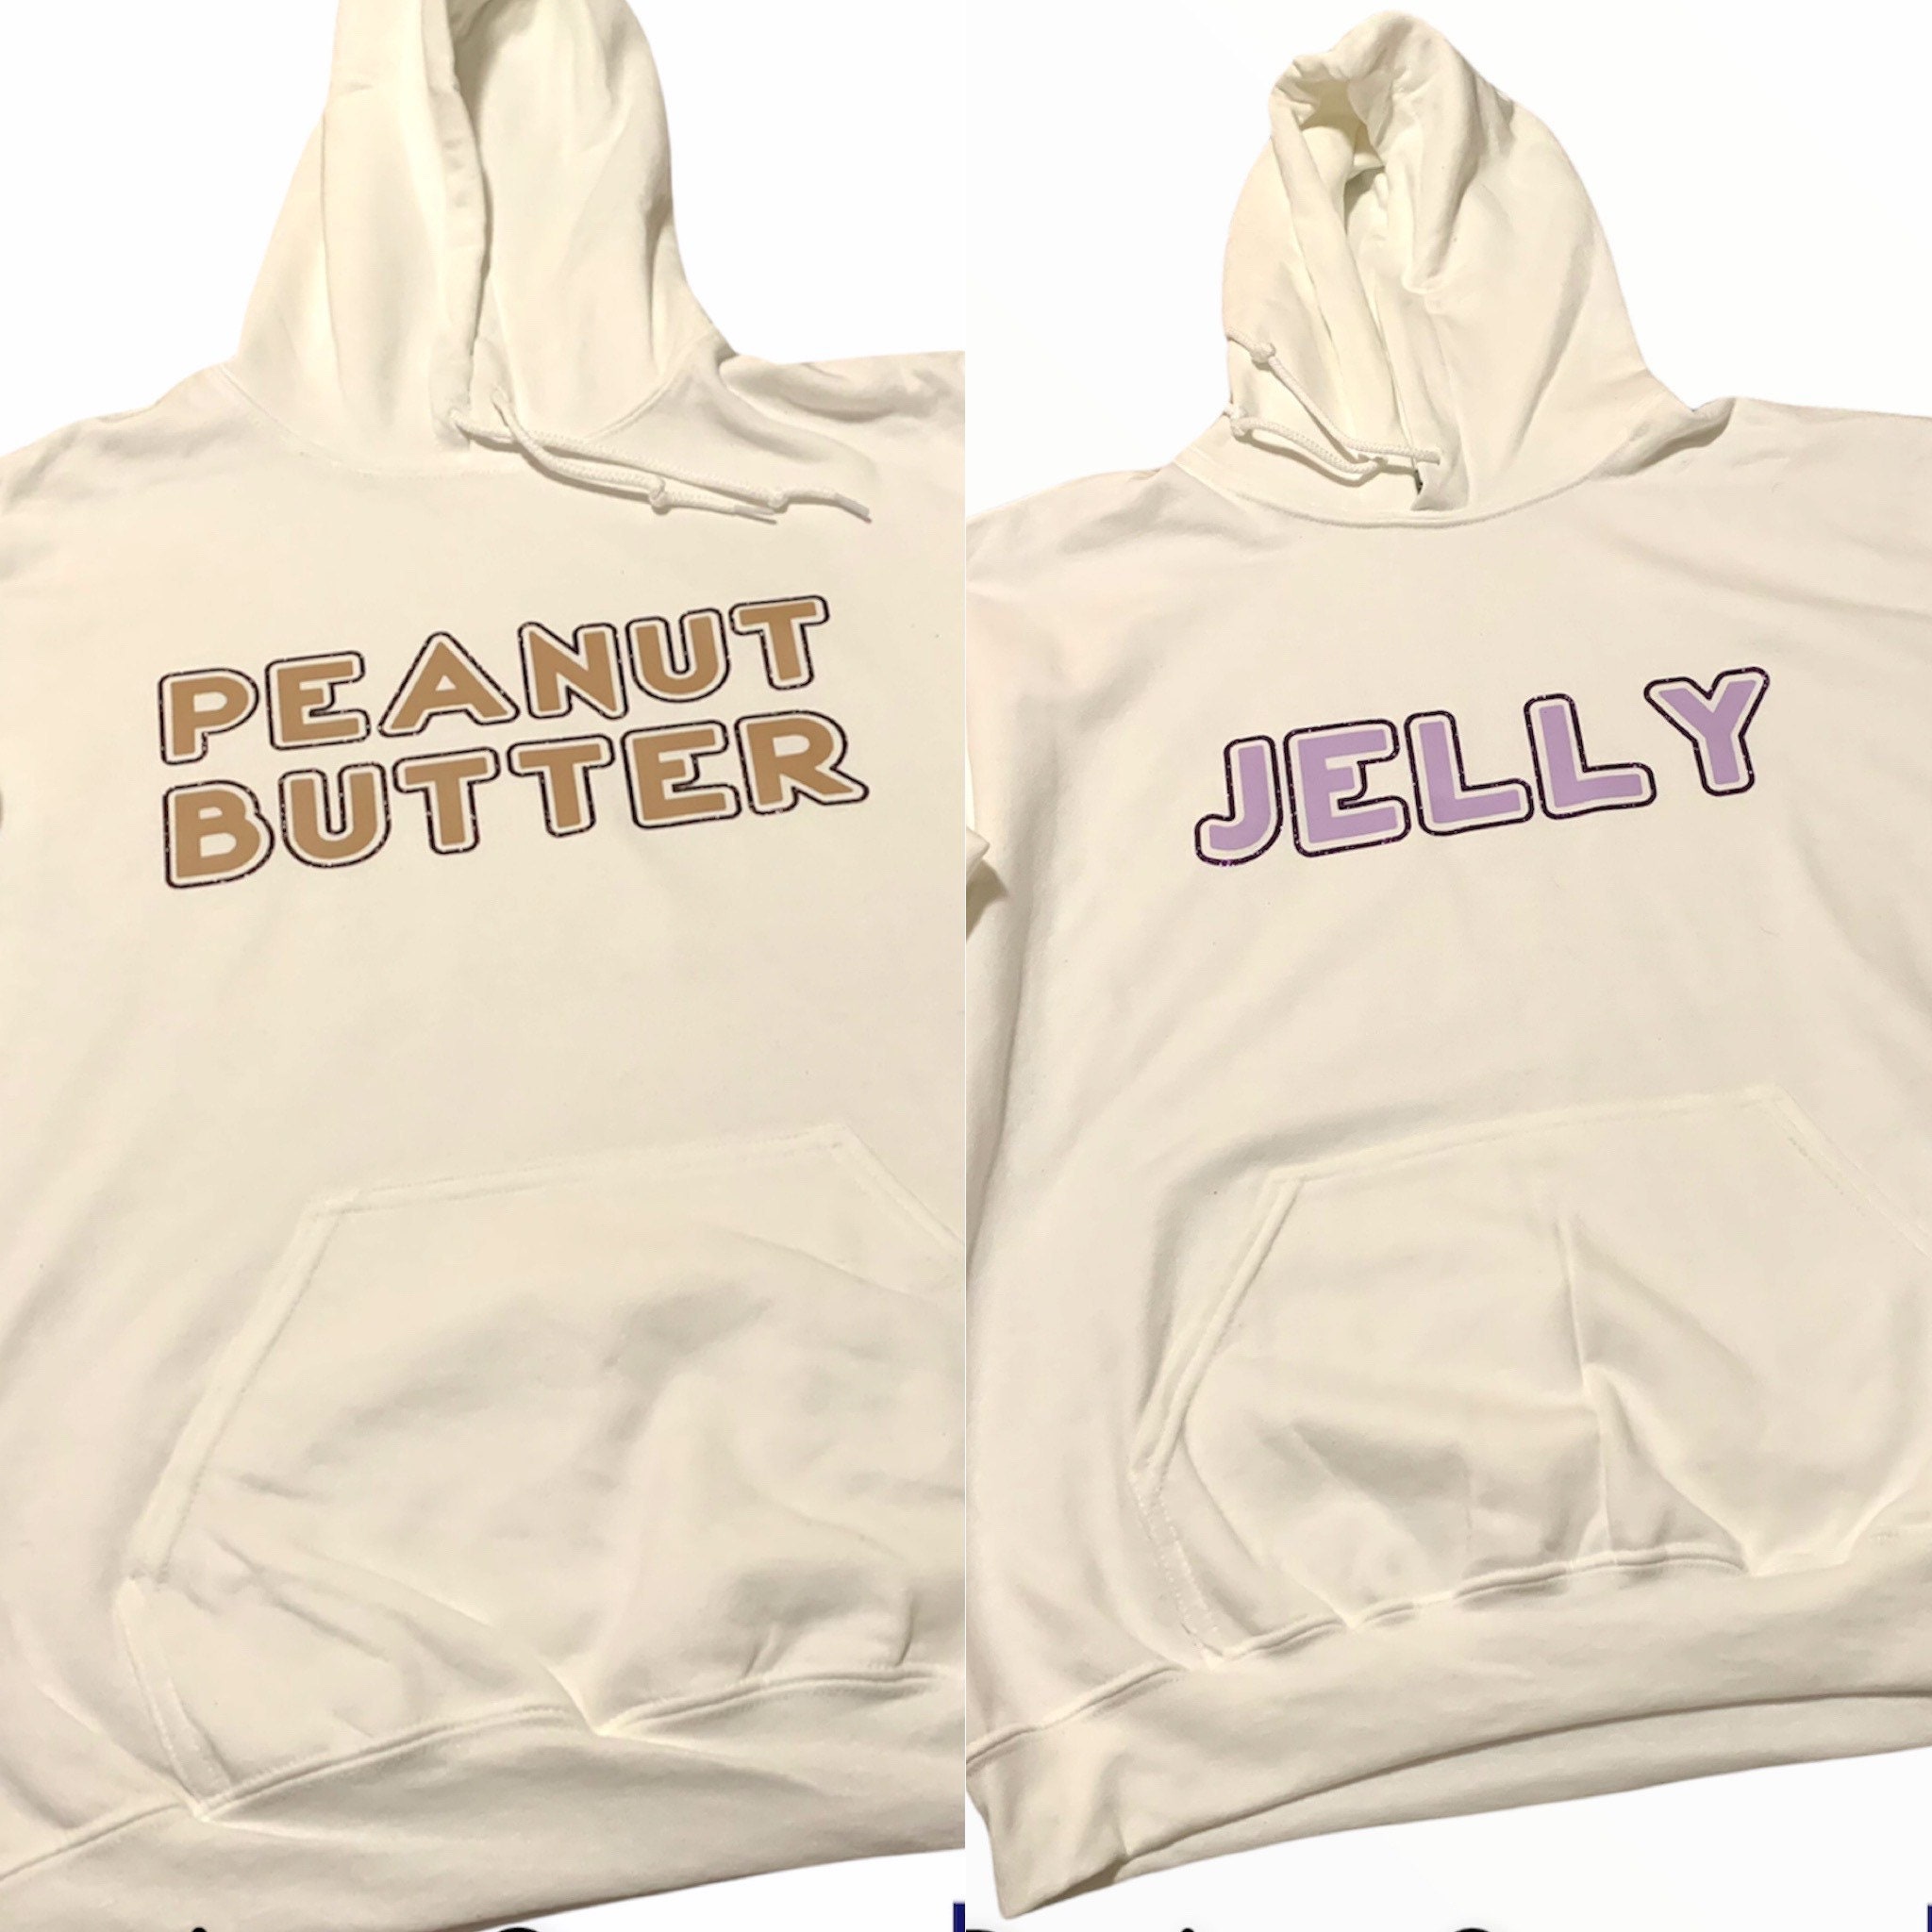 Jelly Hooded Jumper Suit,Tracksuits Long Sleeve Top and Pants Set,YouTube Gamer Jelly Hoodies for Kids,Boys and Girls 